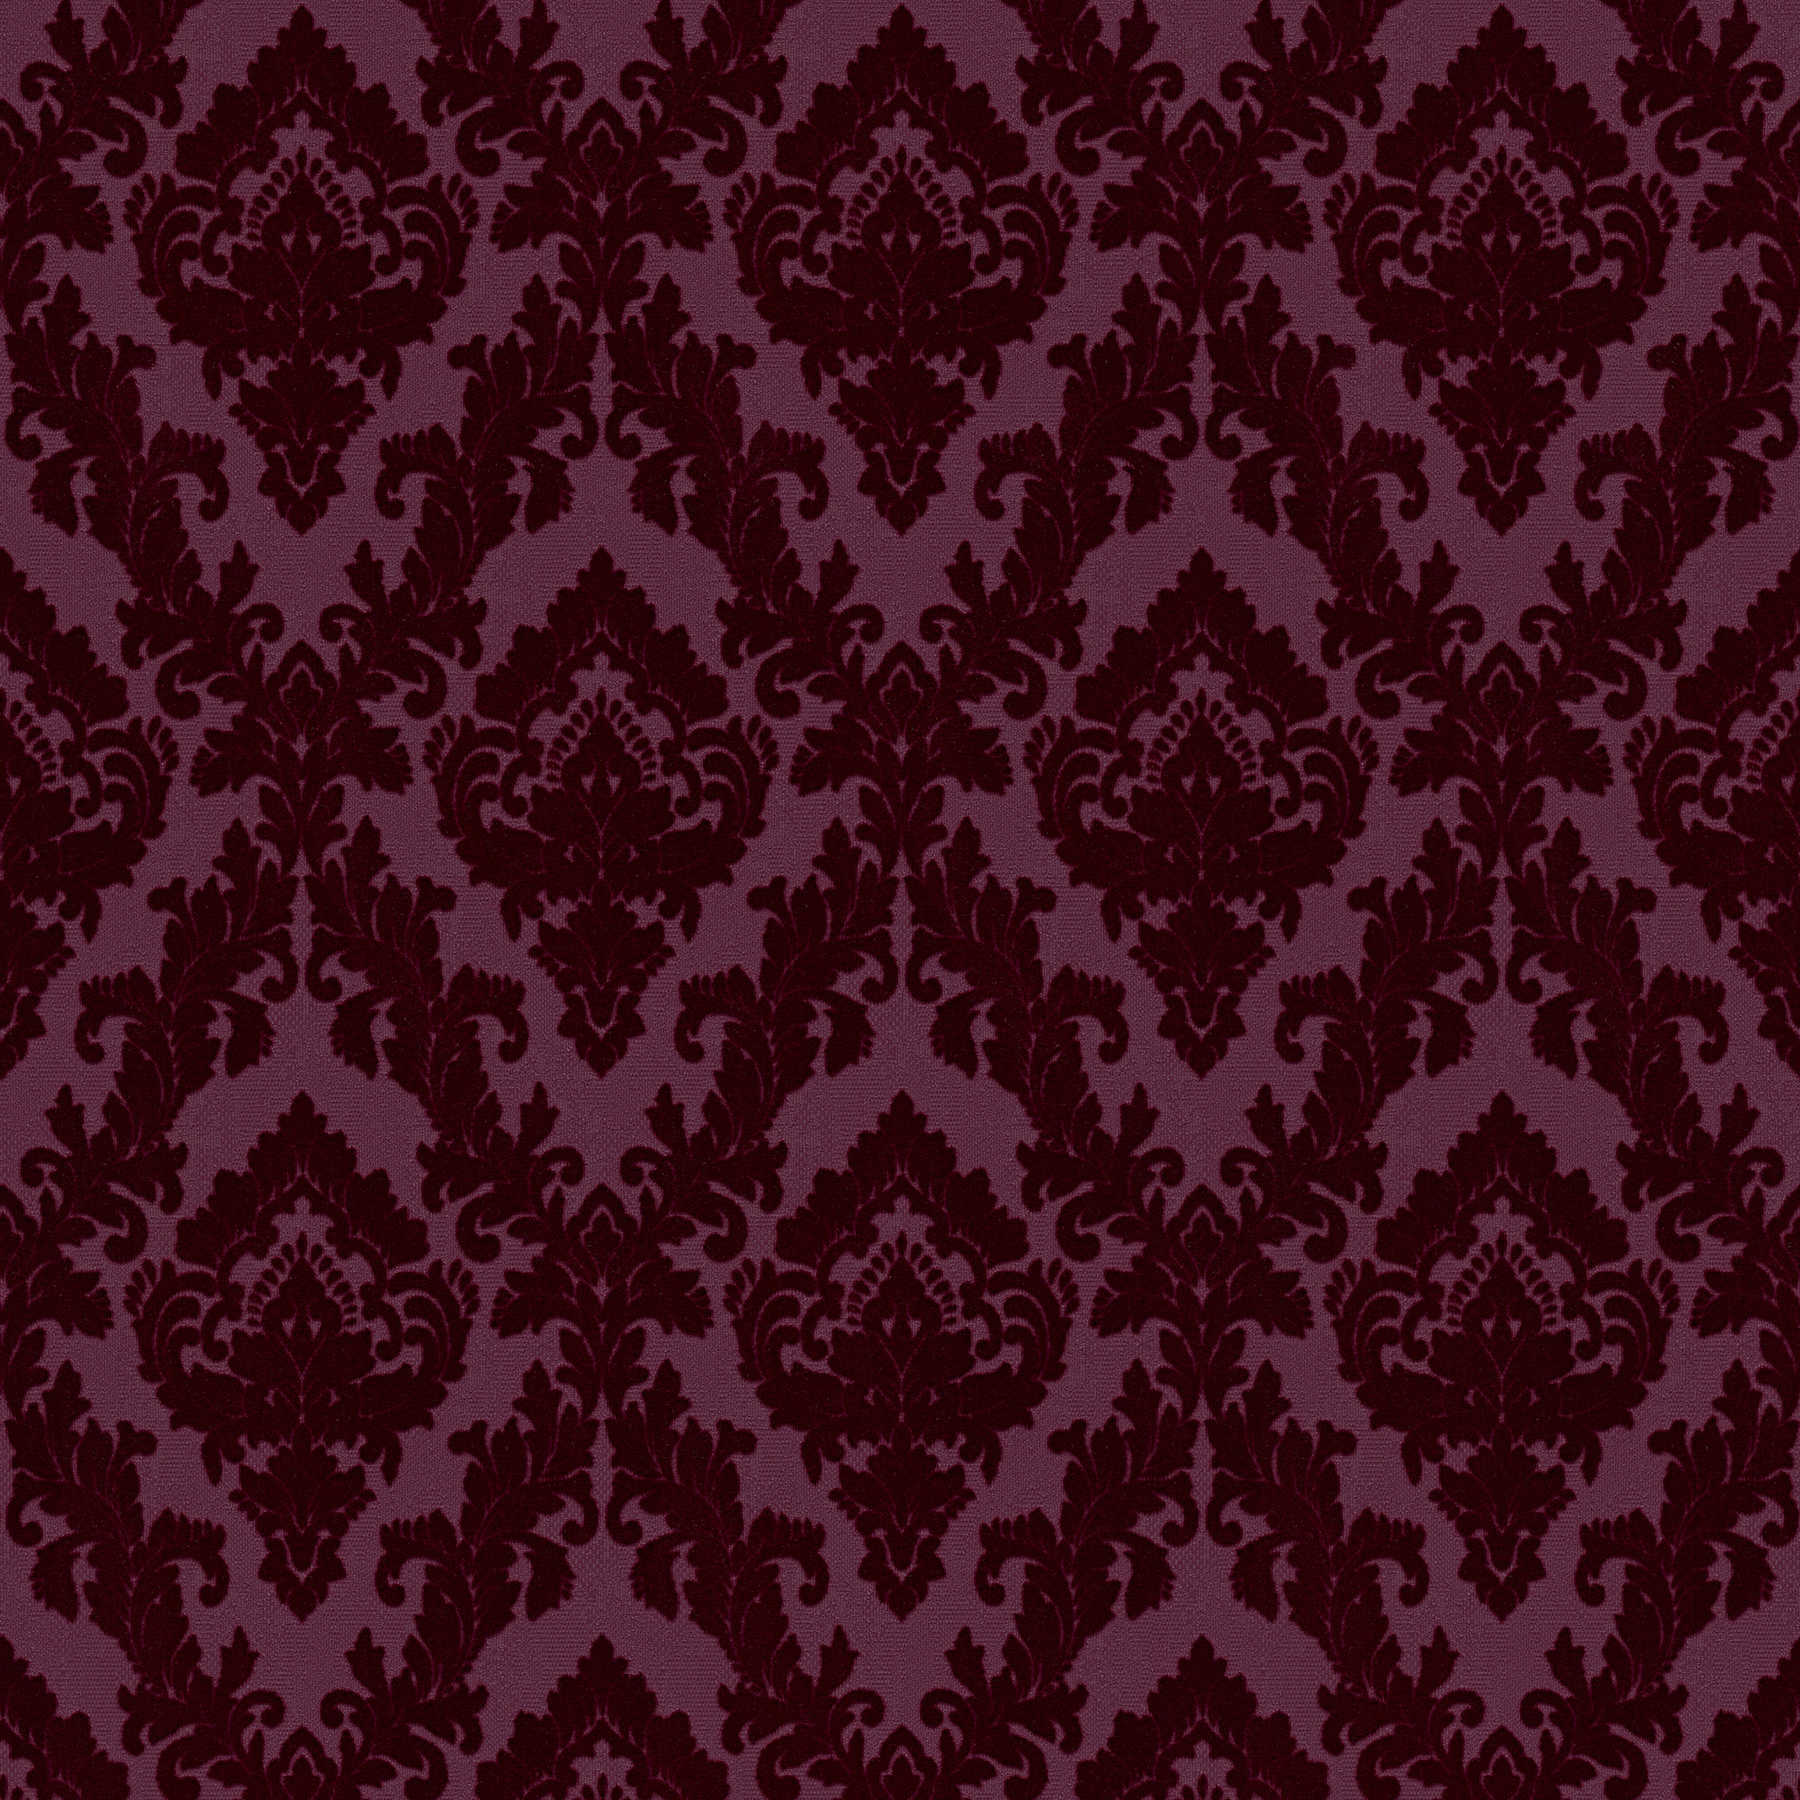         Baroque wallpaper black & purple with gothic design - red
    